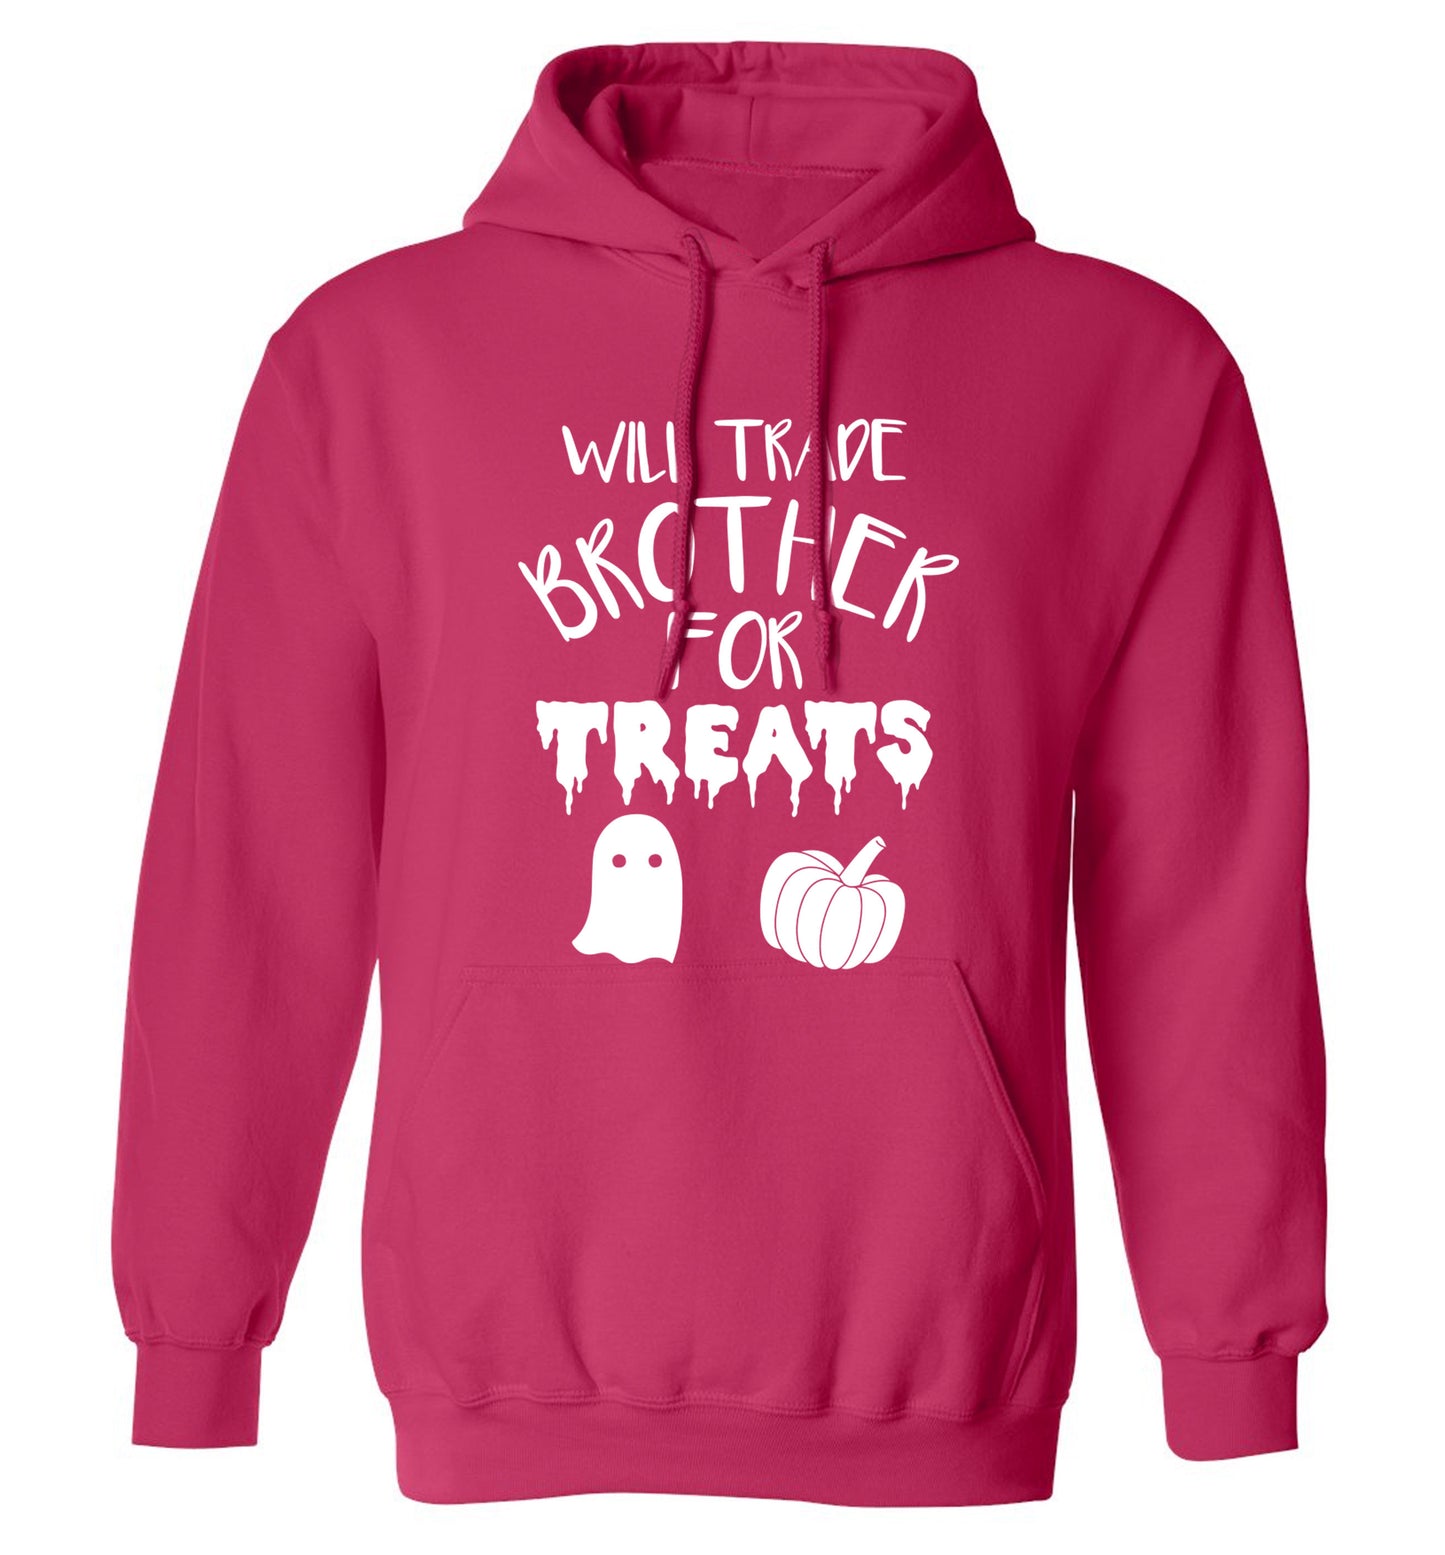 Will trade brother for treats adults unisex pink hoodie 2XL